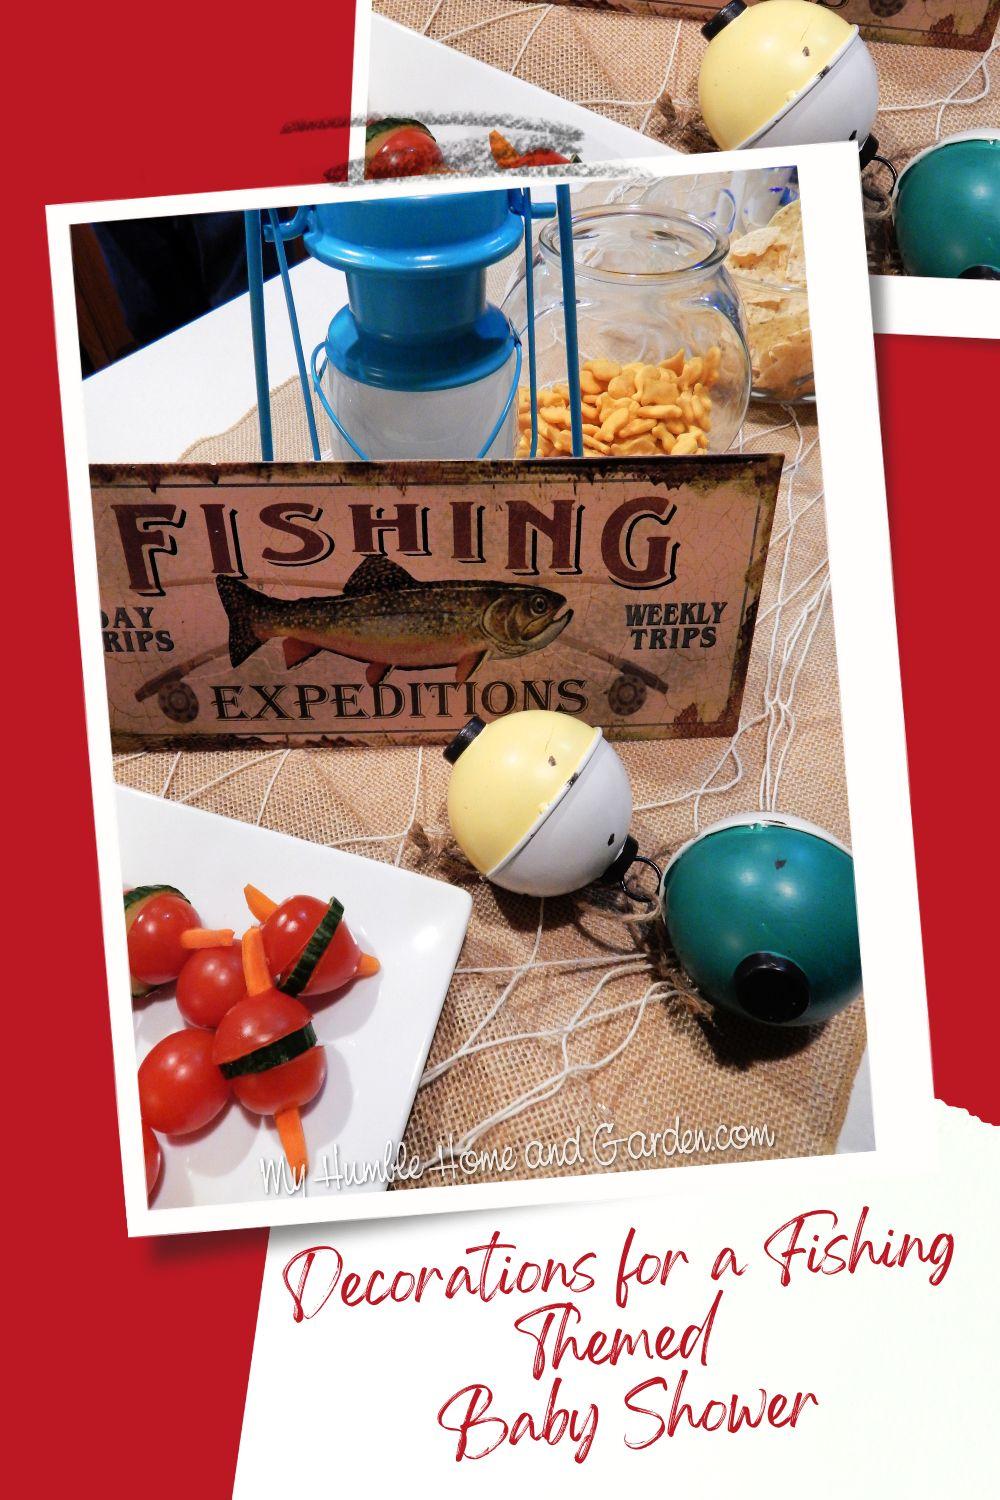 How to Decorations for a Fishing Themed Party - My Humble Home and Garden